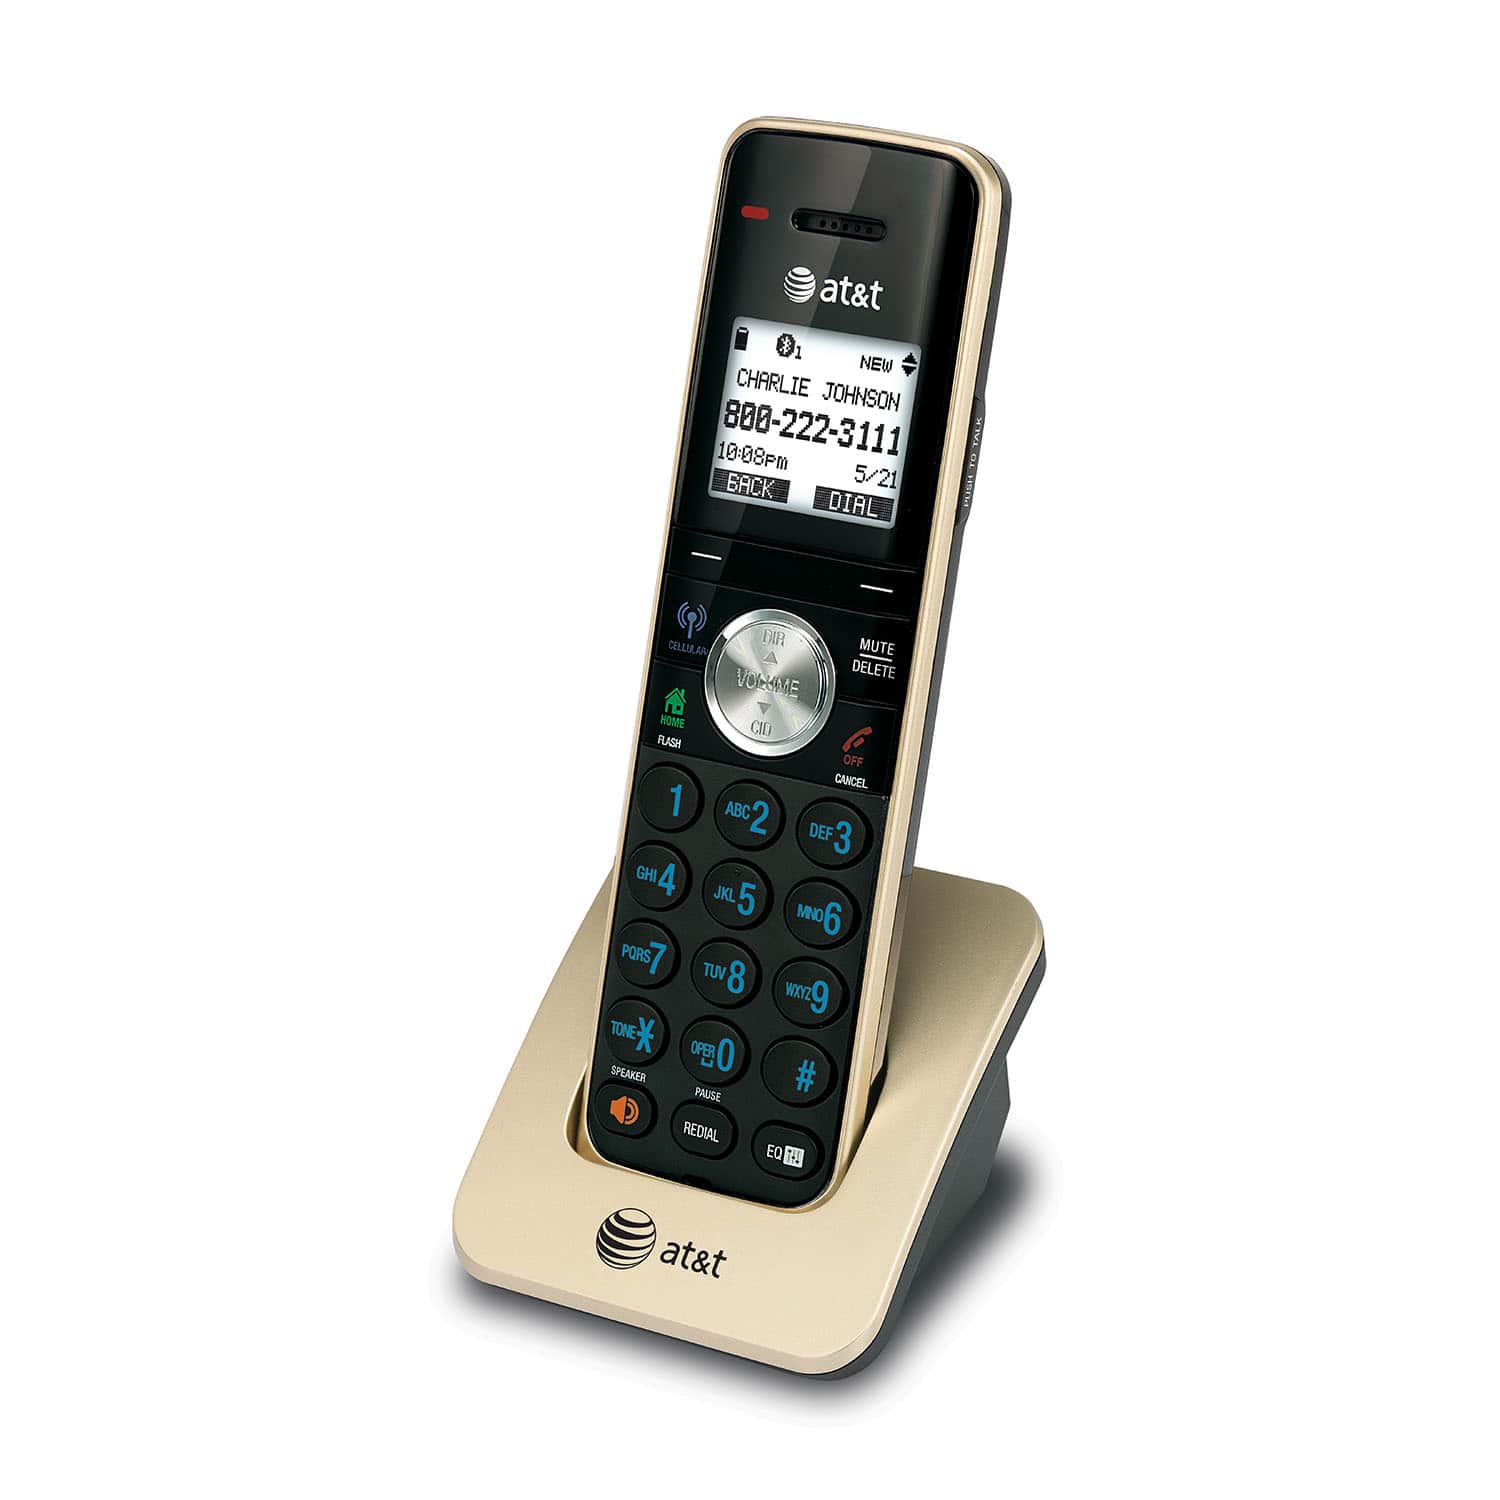 4 handset Connect to Cell™ answering system with caller ID/call waiting - view 6